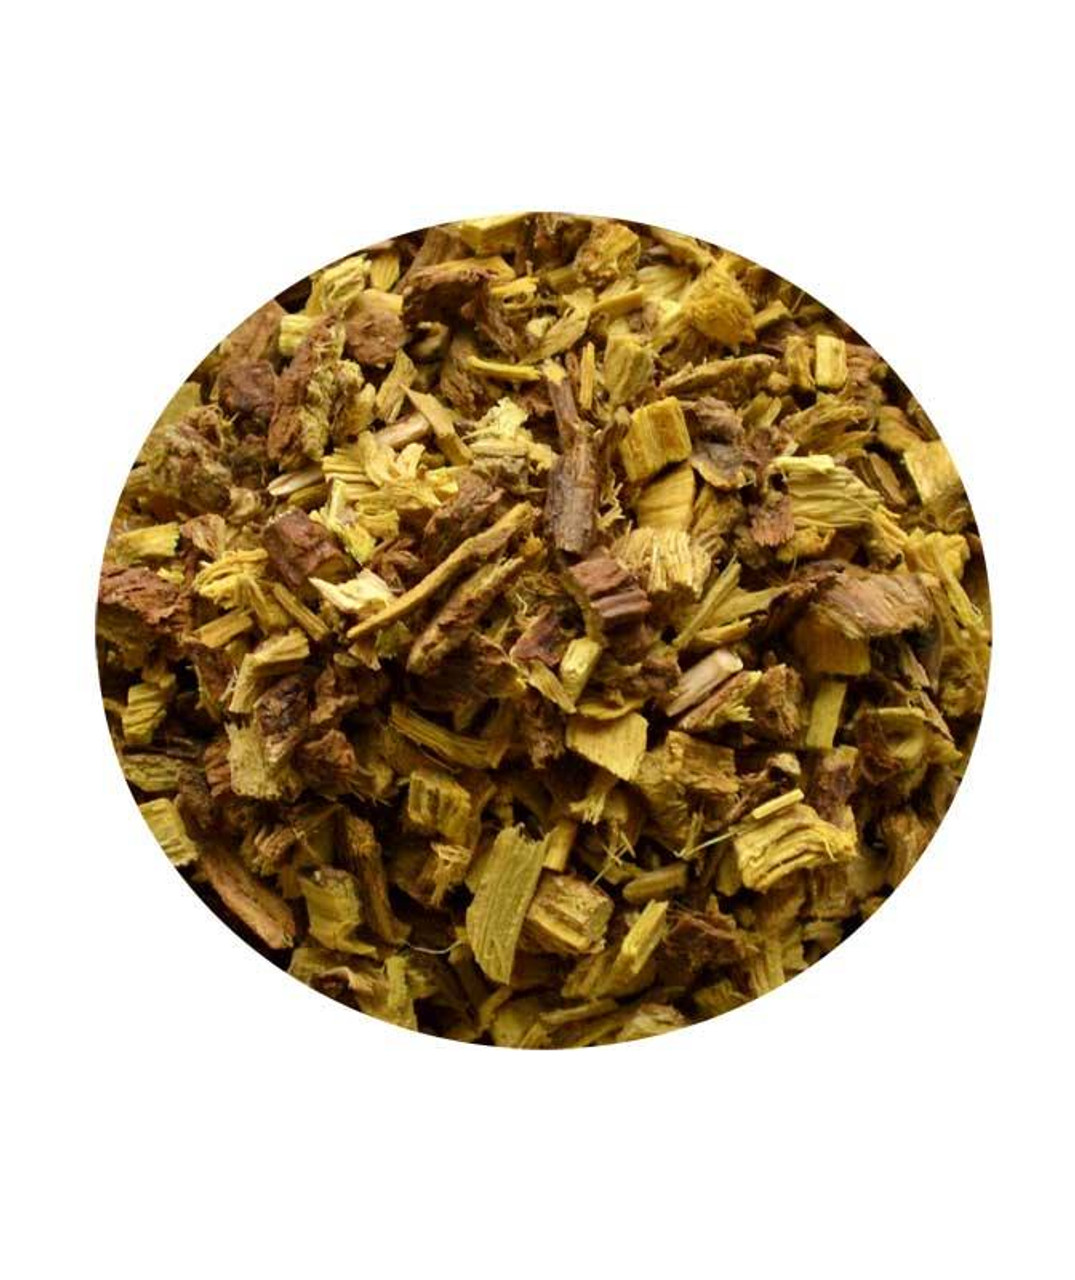 Licorice Root 1 lb. cut/sifted